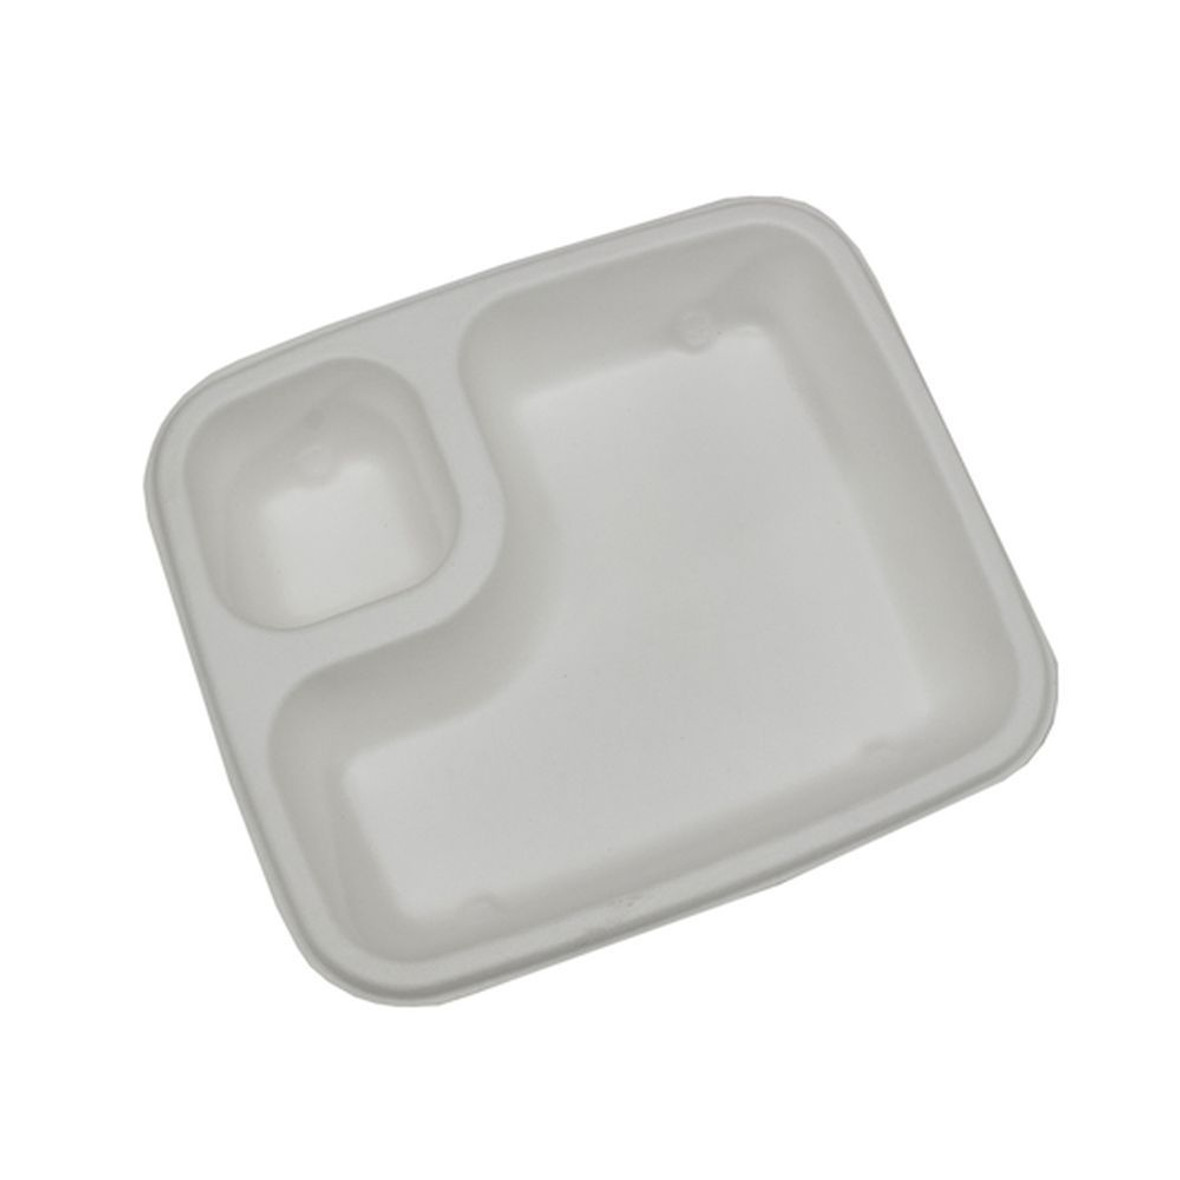 Galligreen Tray Food Take Out 8 Inch X 6 Inch, 500 Per Case